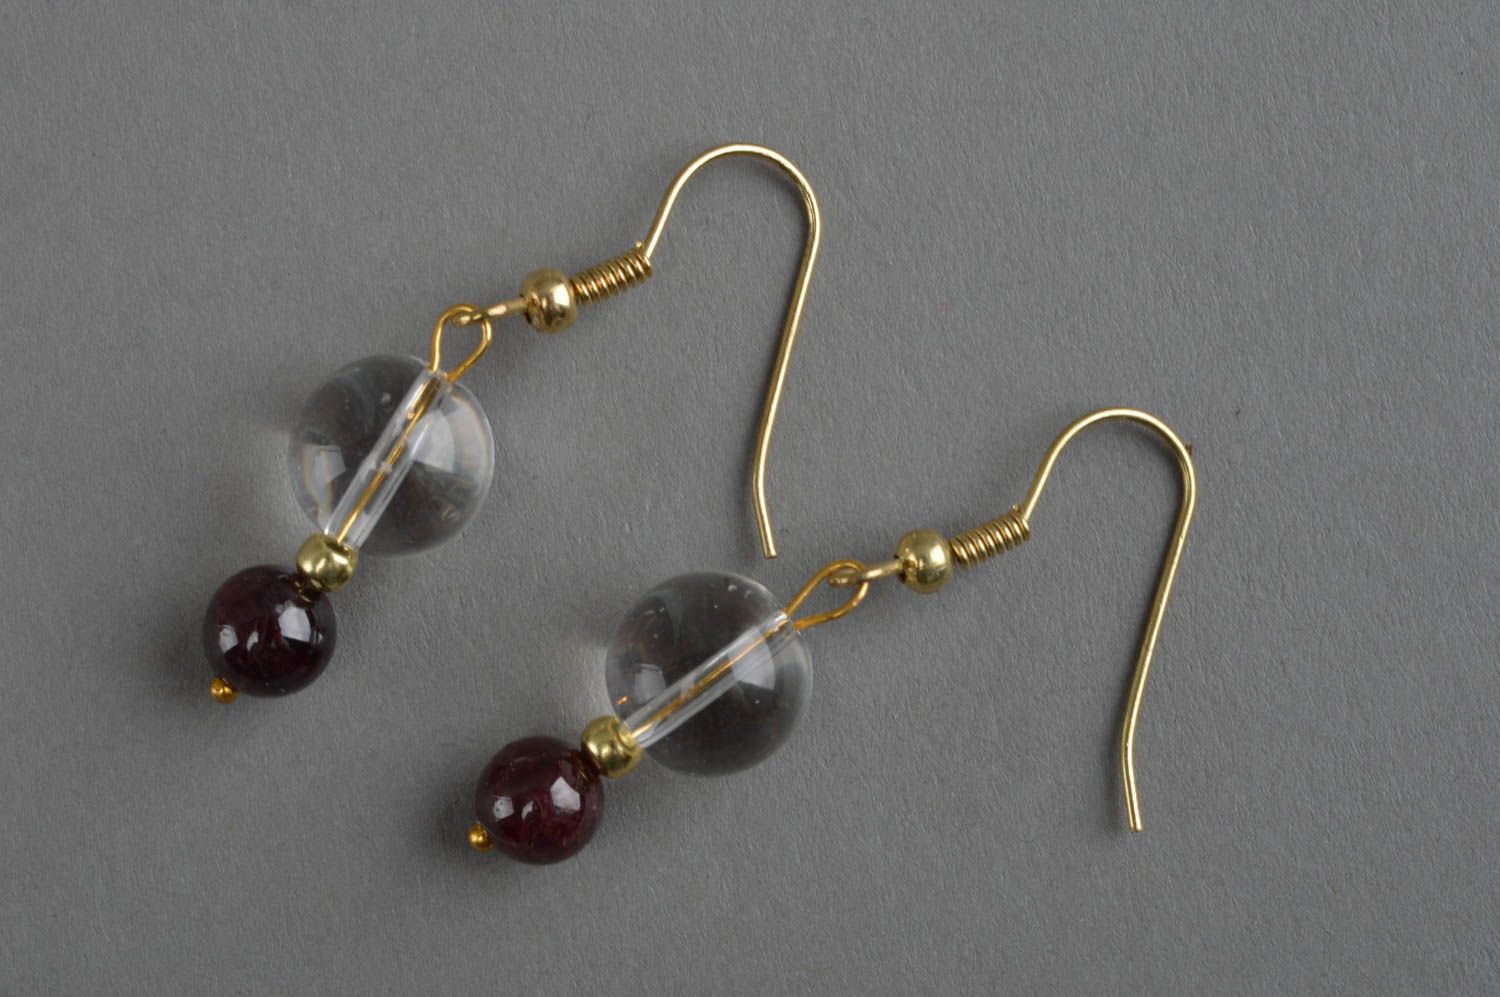 Handmade earrings with quartz accessory with natural stones designer jewelry photo 1